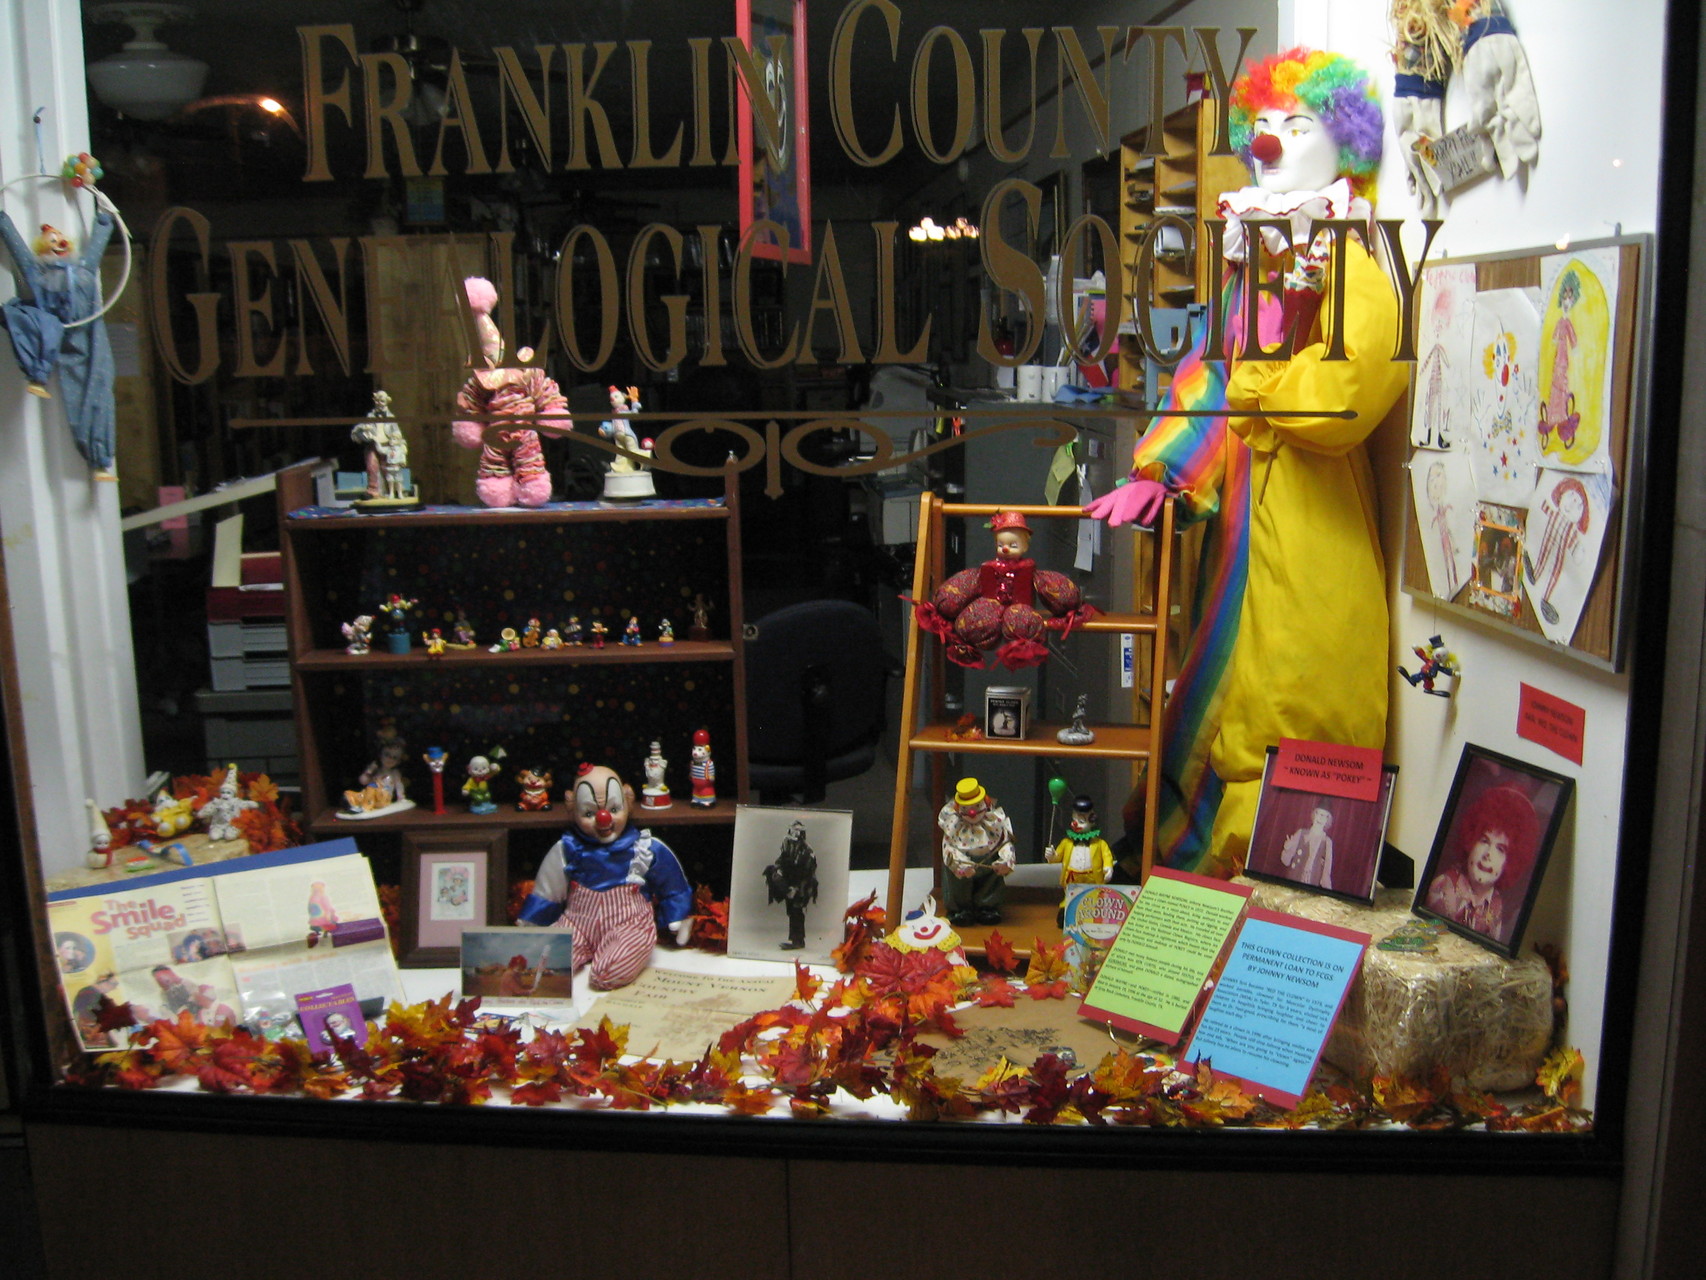 2013 display of Johnny Newsom's clown collection, after retiring from being "Red, the Clown." (Photo courtesy of Sue Bolin)